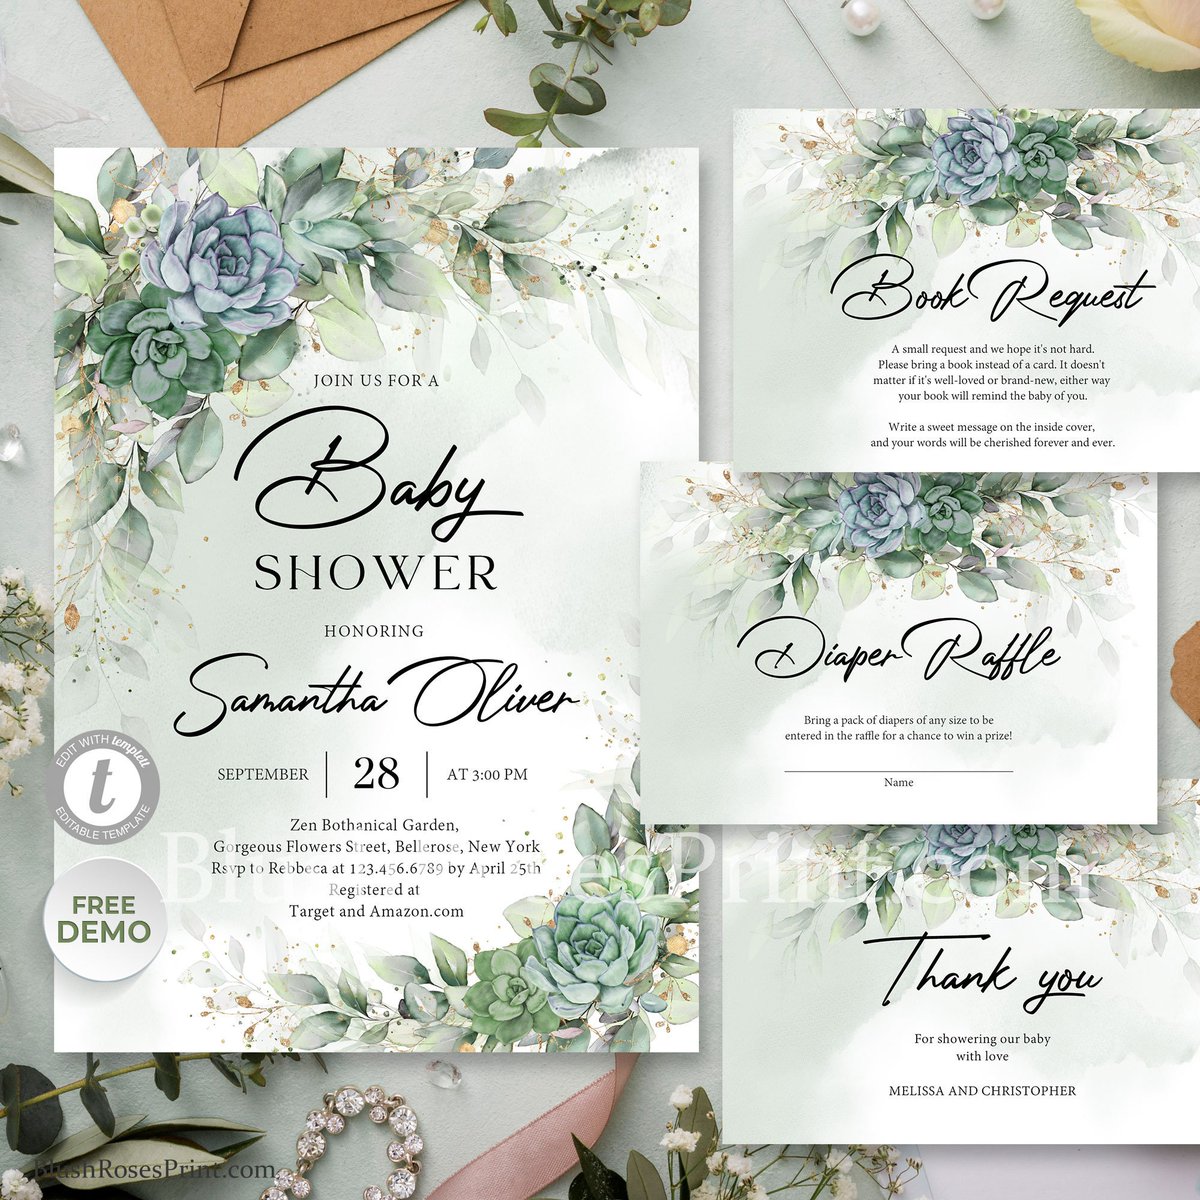 Excited to share the latest addition to my etsy shop etsy.me/3TojEW8: Succulents Baby Shower Invitation Template, Greenery Boho Baby Shower Invite, Green Eucalyptus and Gold Baby Shower, INSTSANT DOWNLOAD #150  #green #babyshower #gold #babyshowerinvite #editab